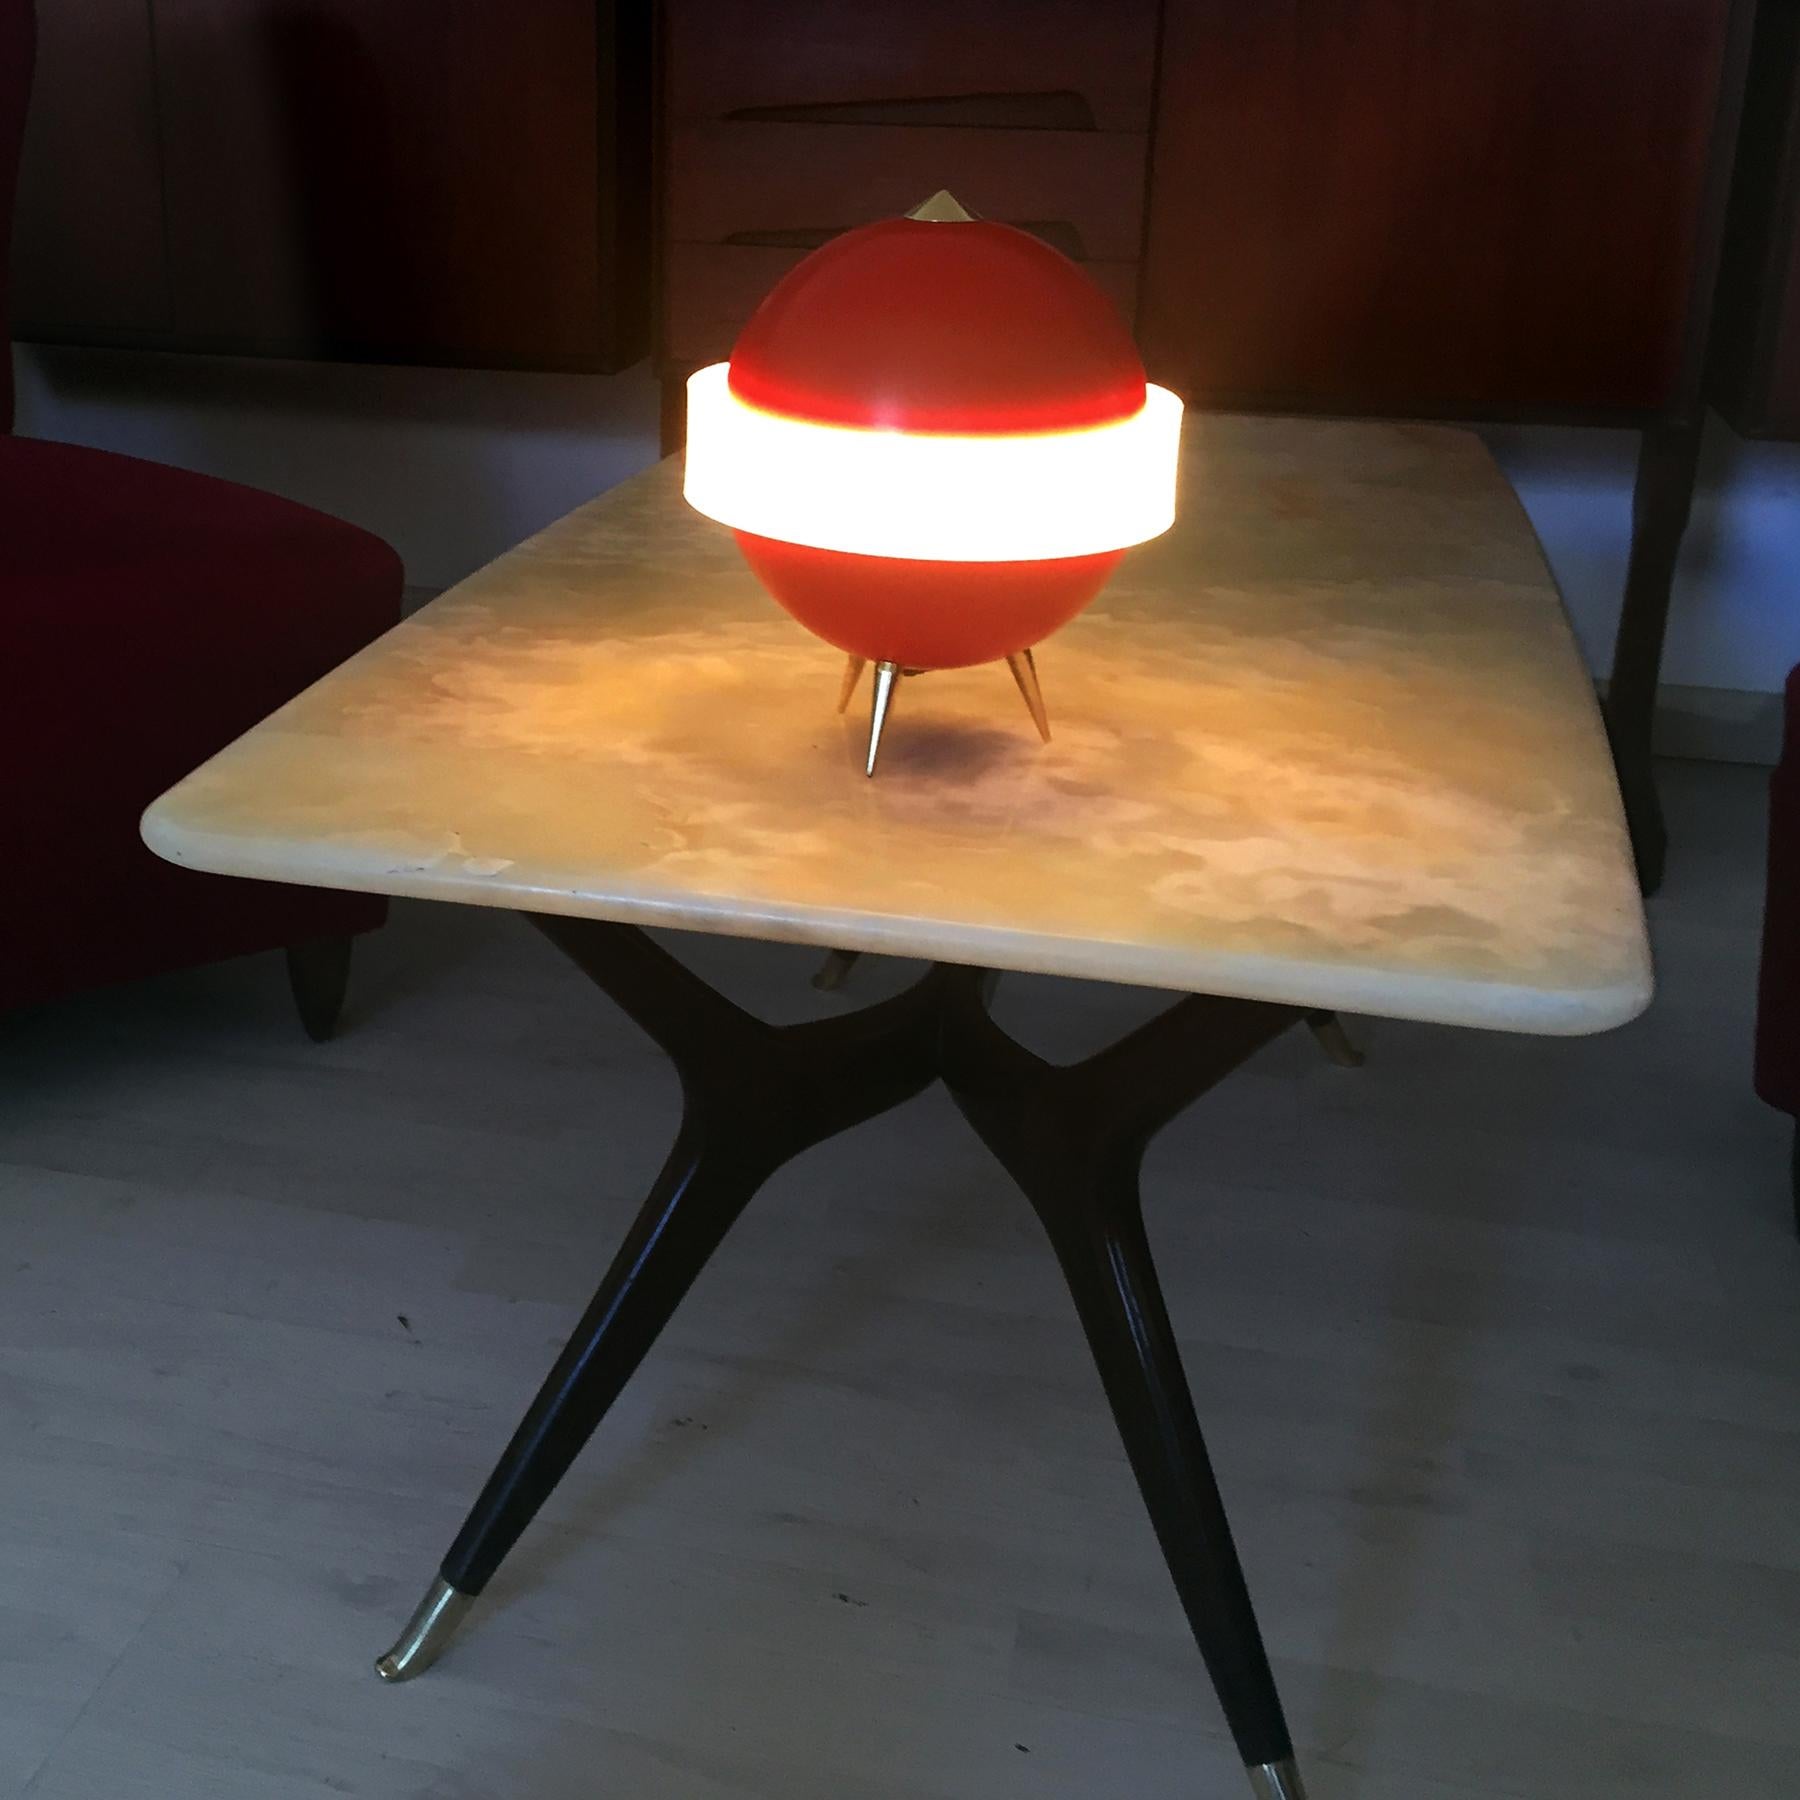 Mid-20th Century Italian Mid-Century Red Table Lamp 'Lumino' by Angelo Brotto for Esperia, 1950s For Sale